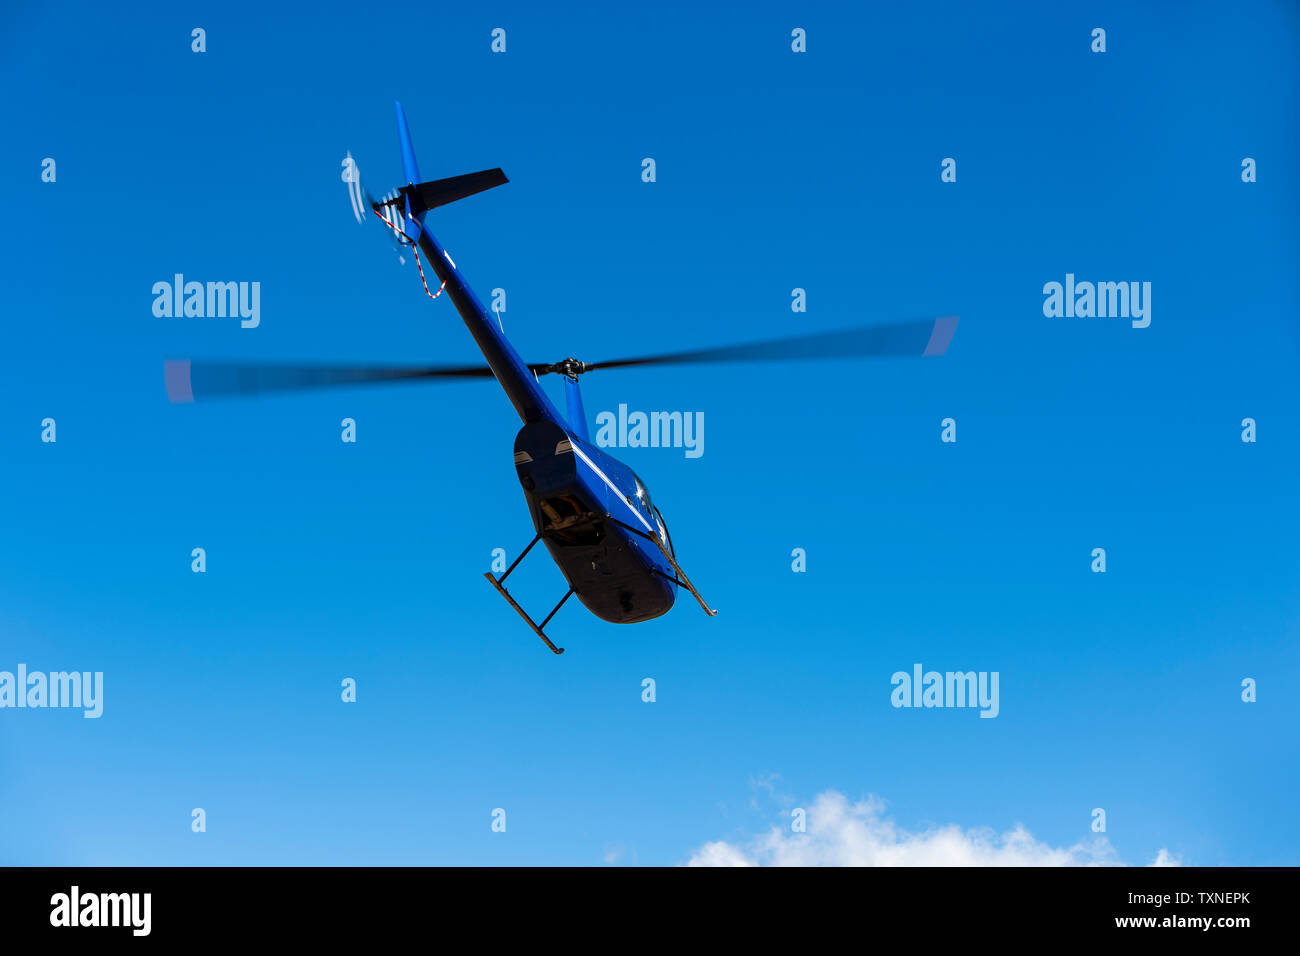 Helicopter flying against blue sky, low angle view, Cape Town, Western Cape, South Africa Stock Photo